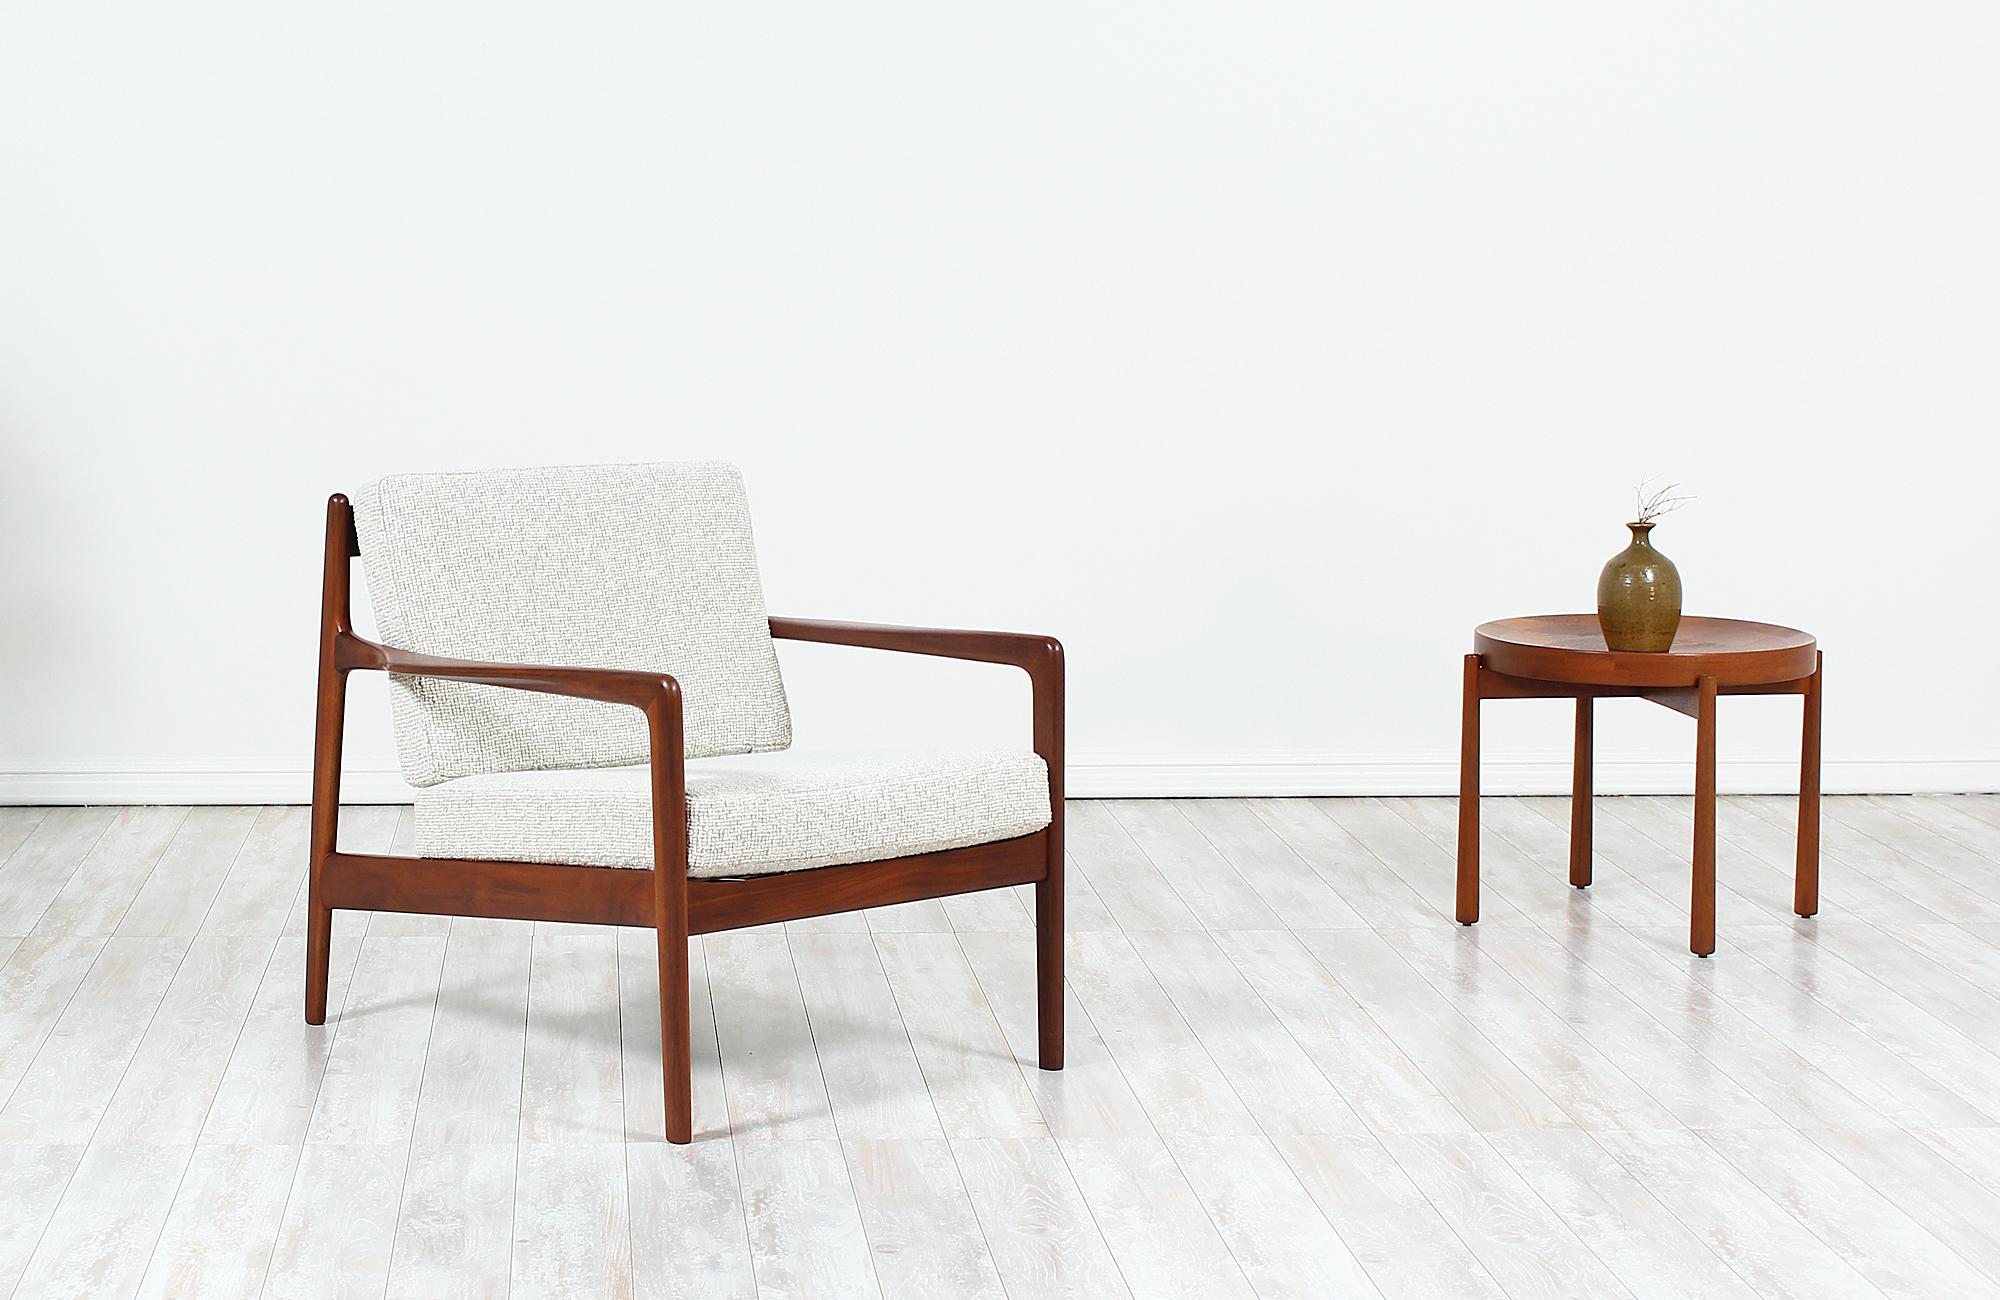 Elegant Model 74-C lounge chair designed by Folke Ohlsson for Dux of Sweden, circa 1950s. This sturdily constructed lounge chair with appropriate proportions and organic contours ensures a comfortable seating experience. Seven vertical slats add